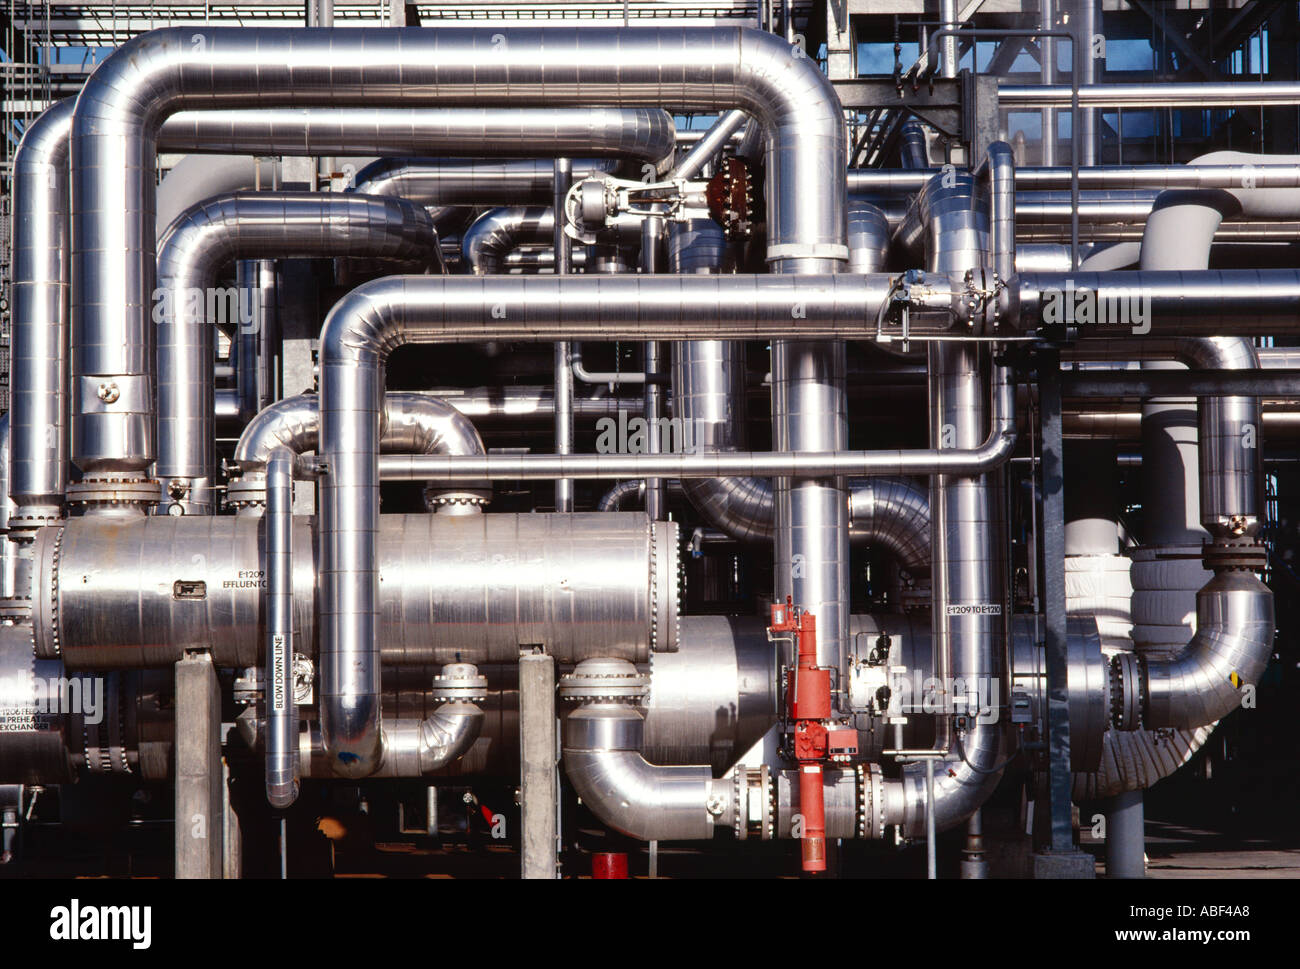 Oil Refinery pattern of pipes Stock Photo